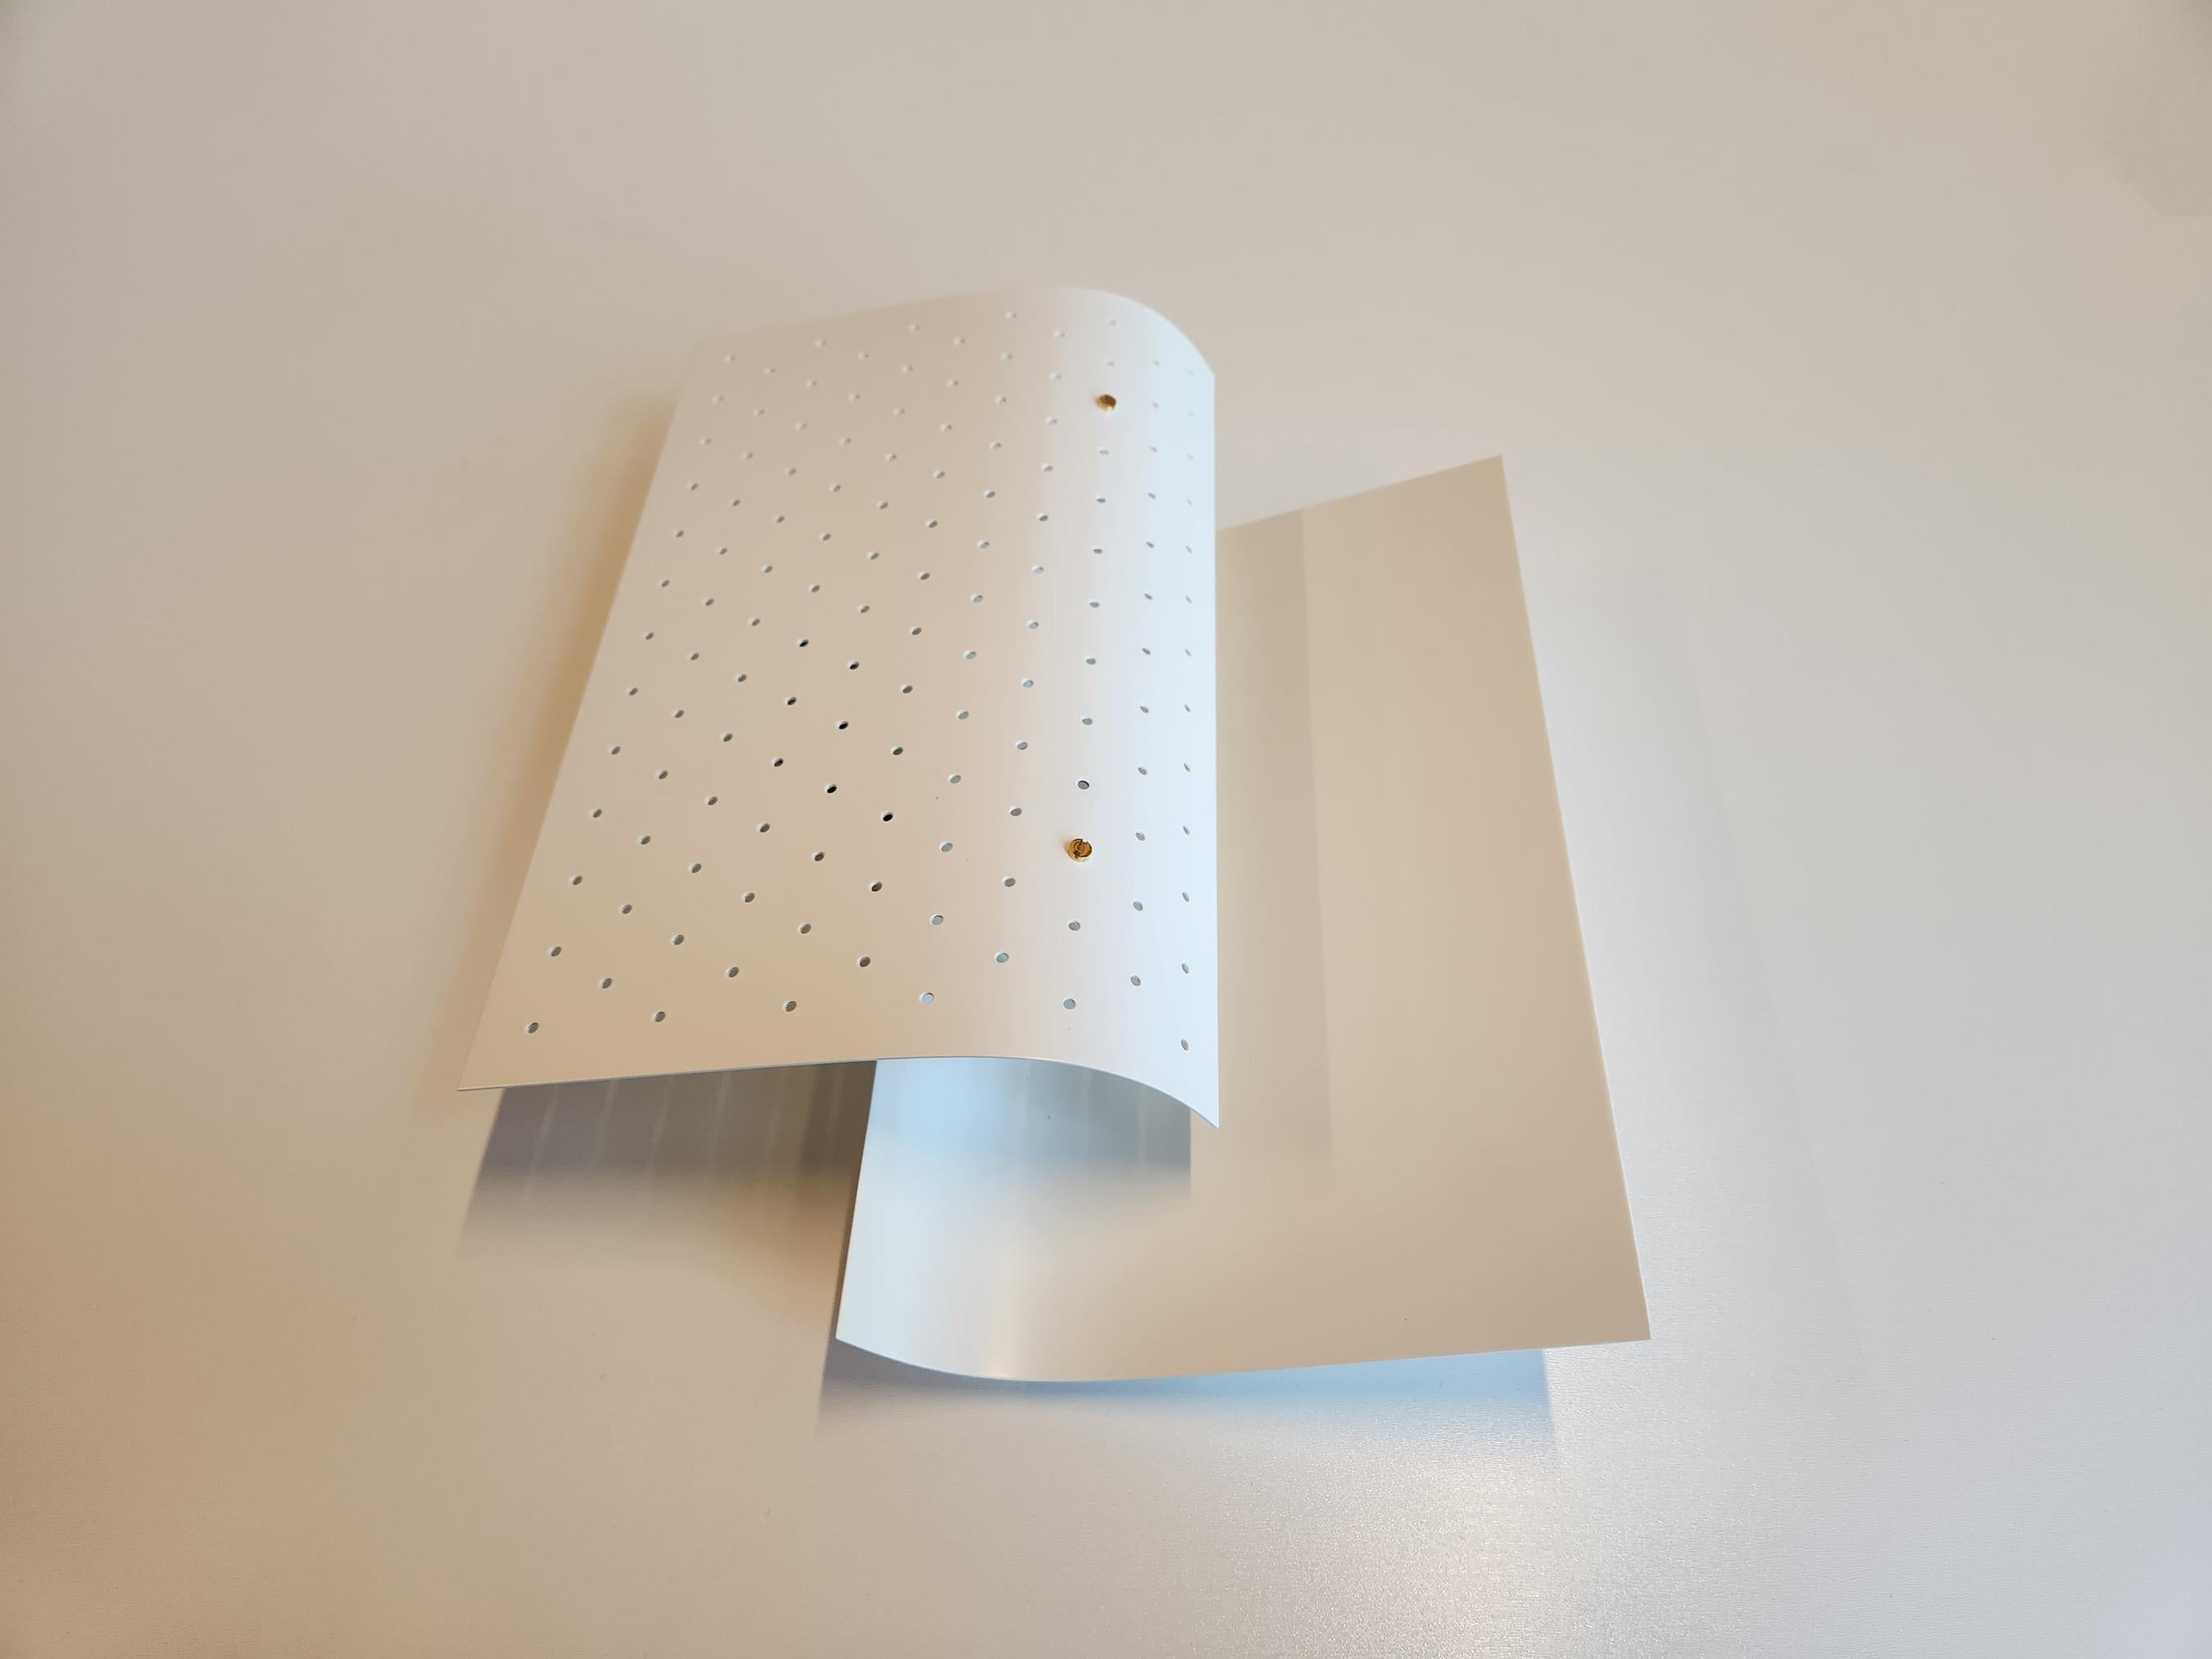 This lamp consists of 2 staggered layers of metal sheets. The light from the light bulb in between the 2 sheets is reflected against a solid steel sheet diffusing the light in the room while a perforated metal sheets in the front indirectly reflects